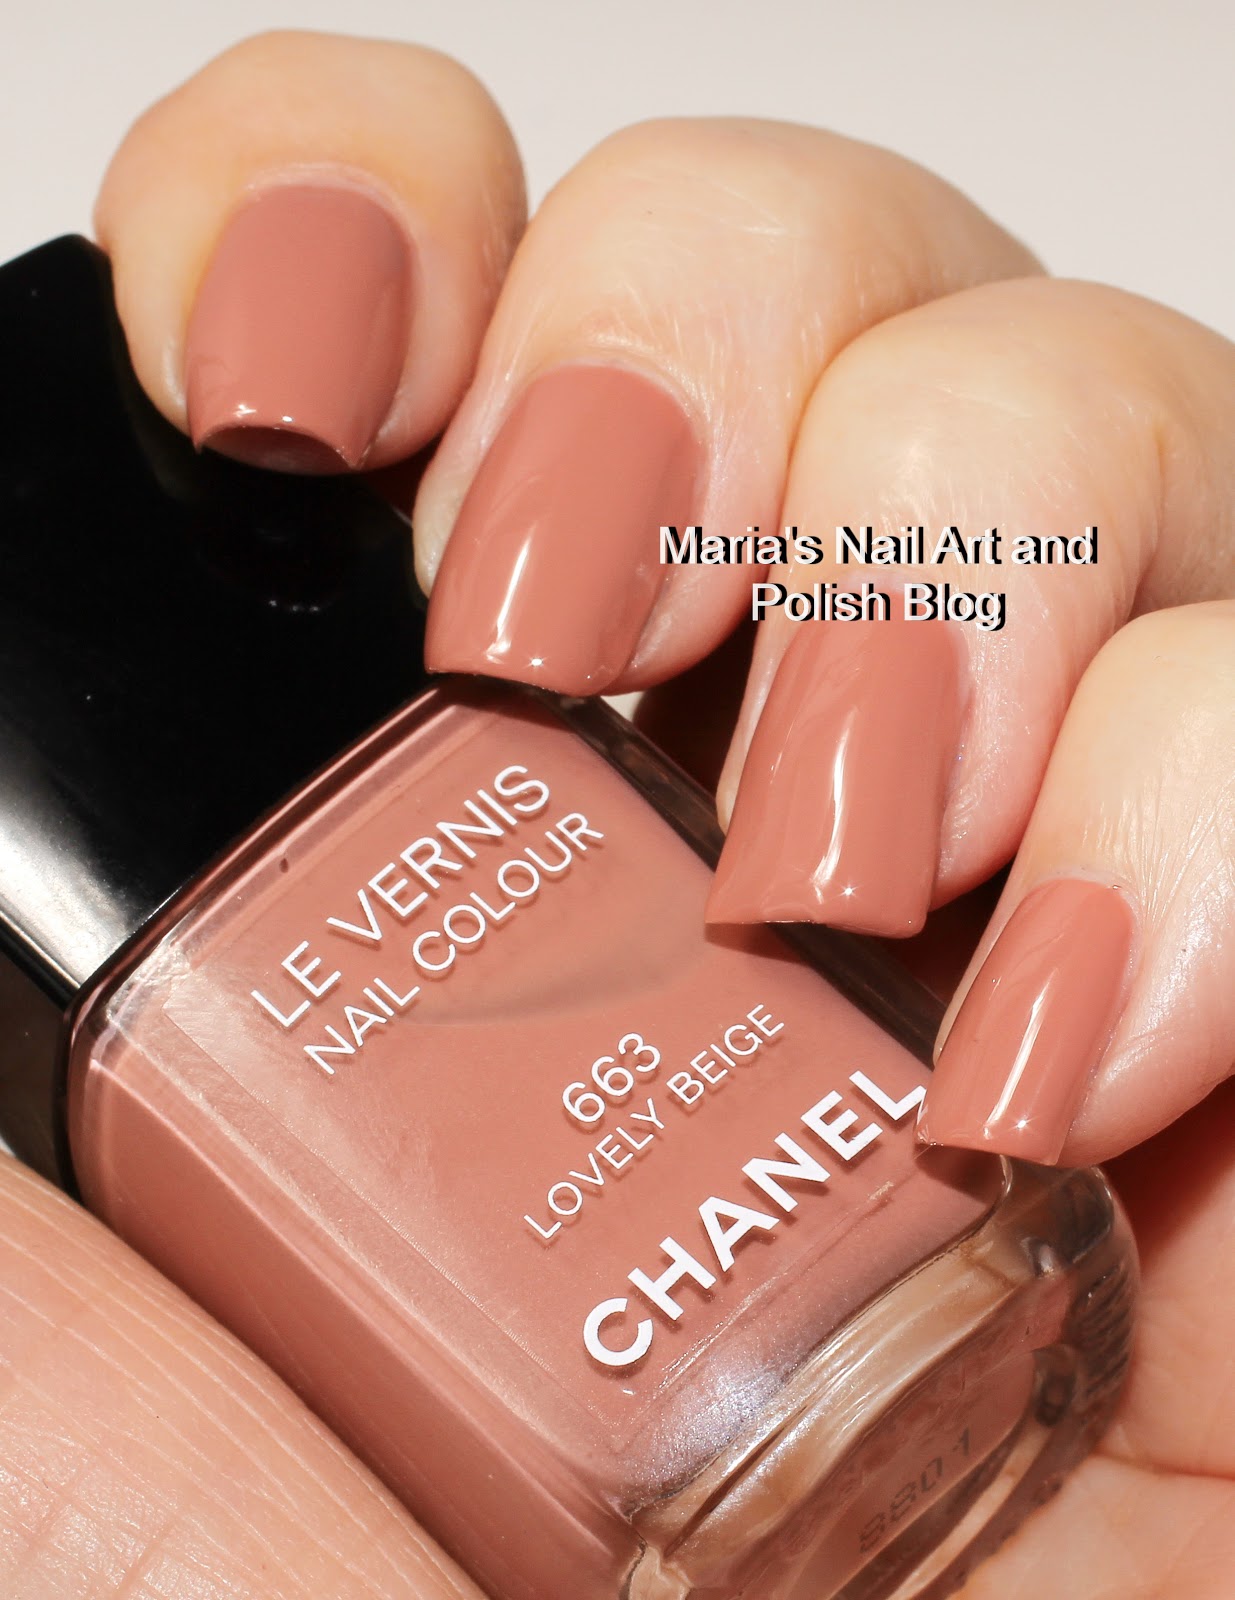 Chanel Beige Pur 659, Precious Beige 661 and Lovely Beige 663